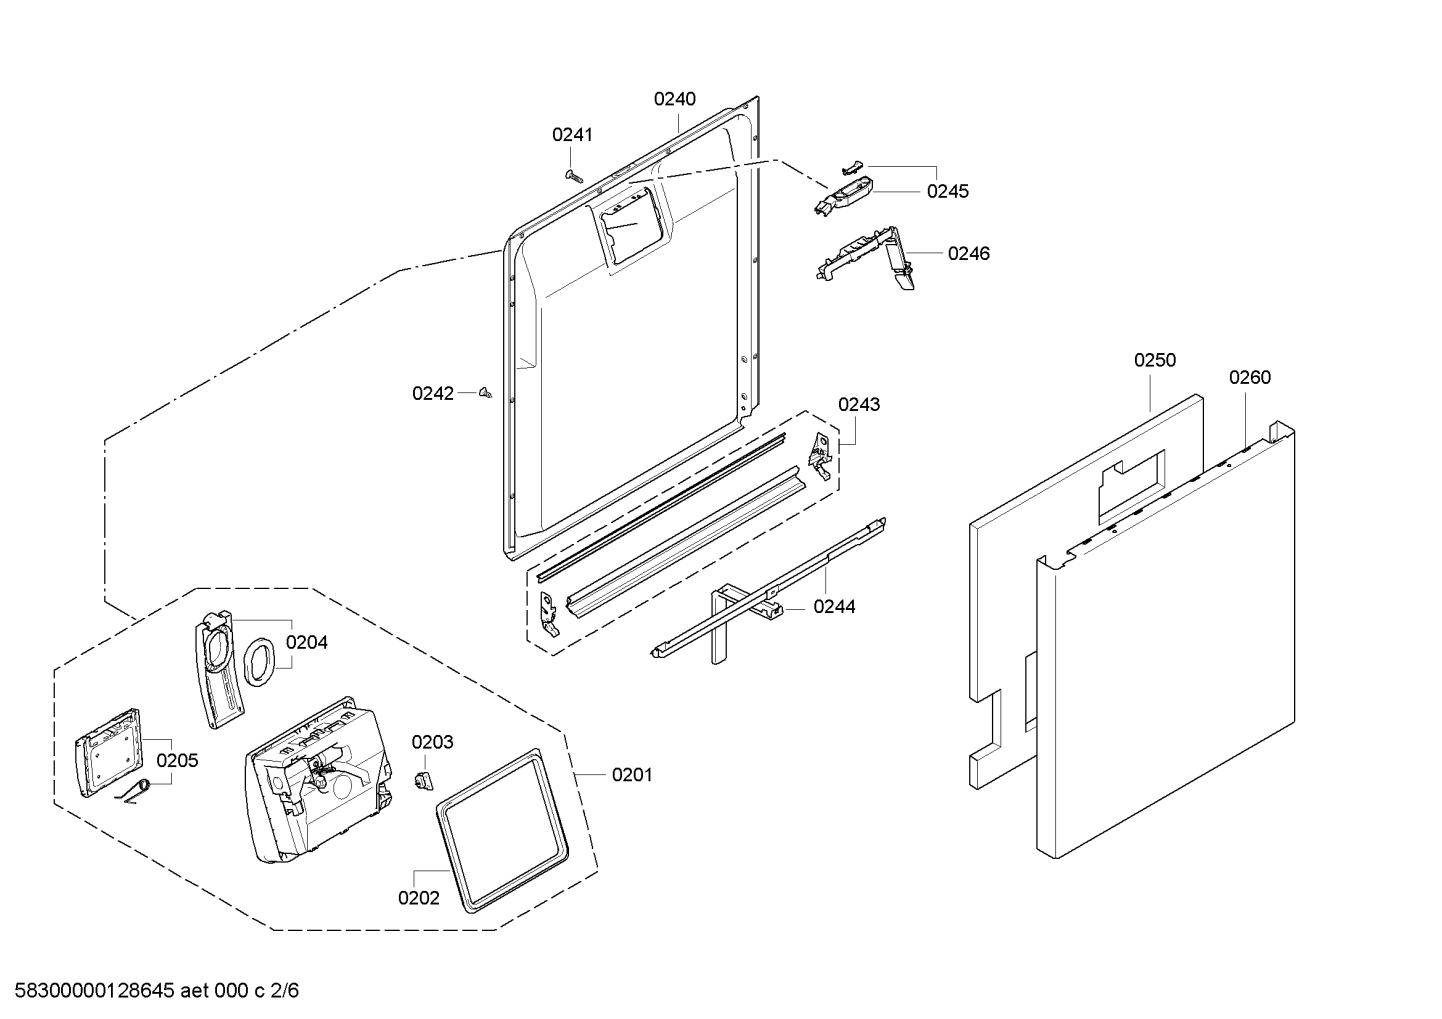 drawing_link_2_device_1658951